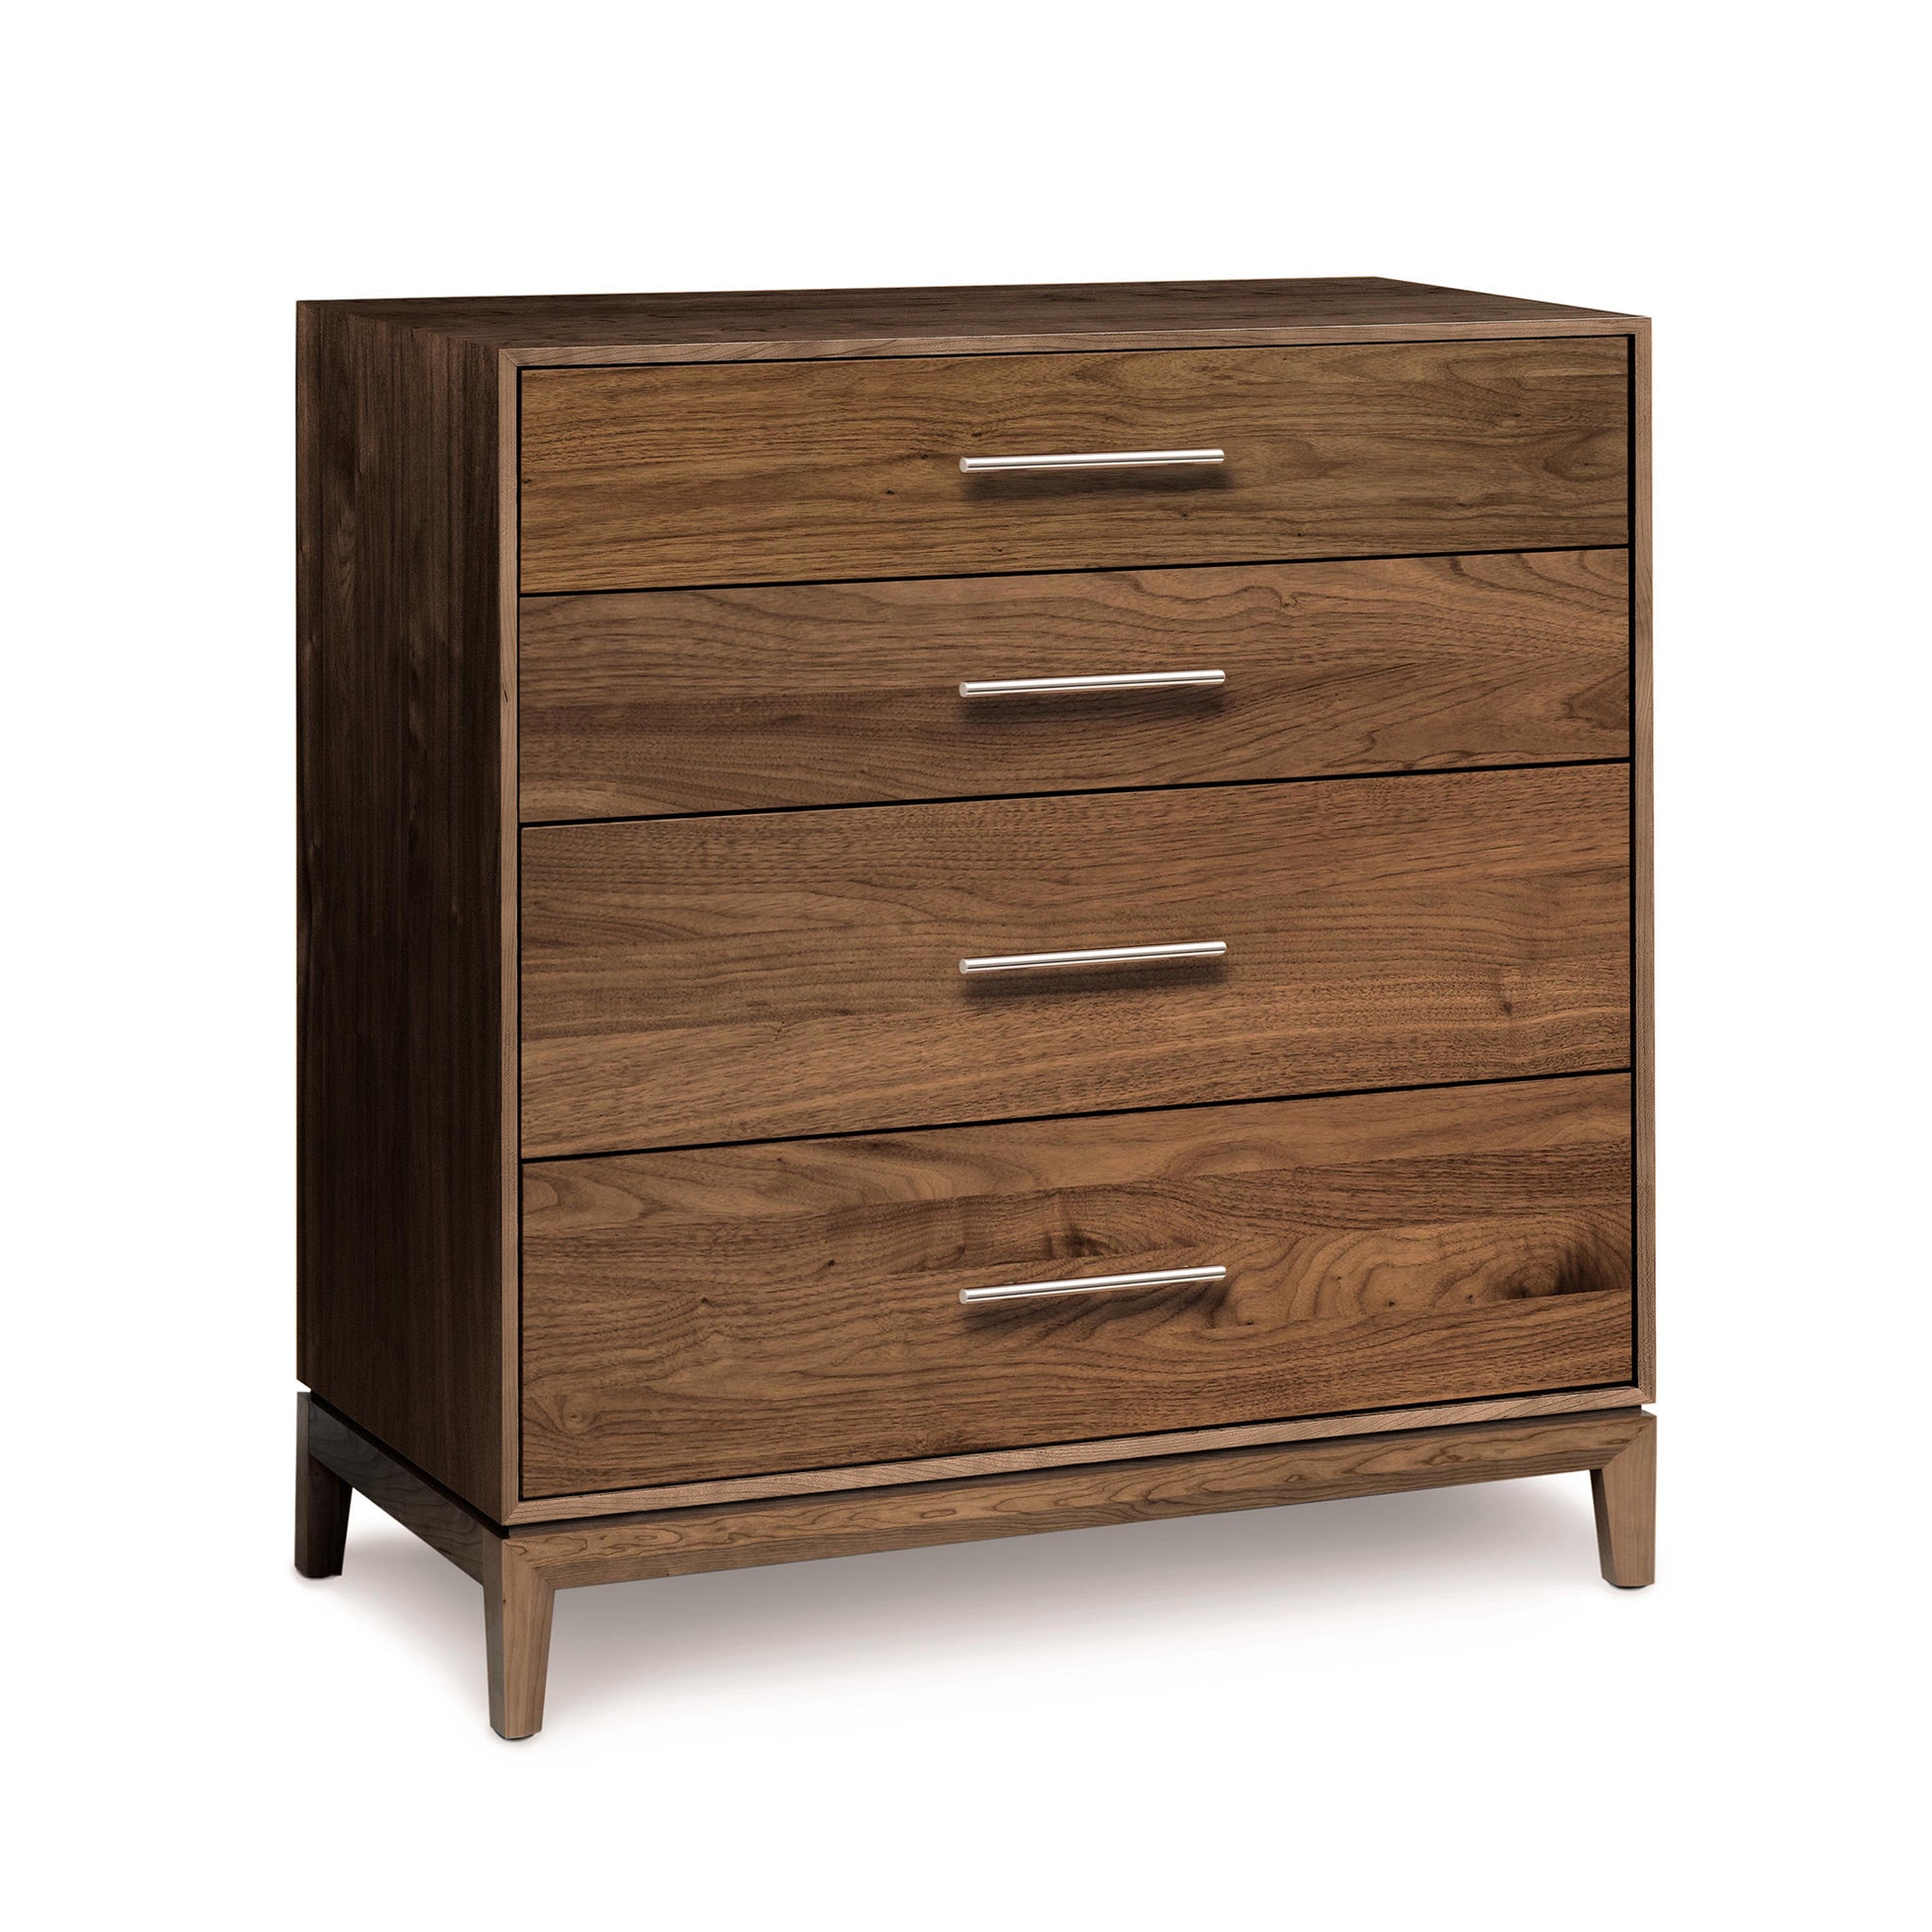 A solid natural wood, Copeland Furniture Mansfield 4-Drawer Chest with metal handles isolated on a white background.